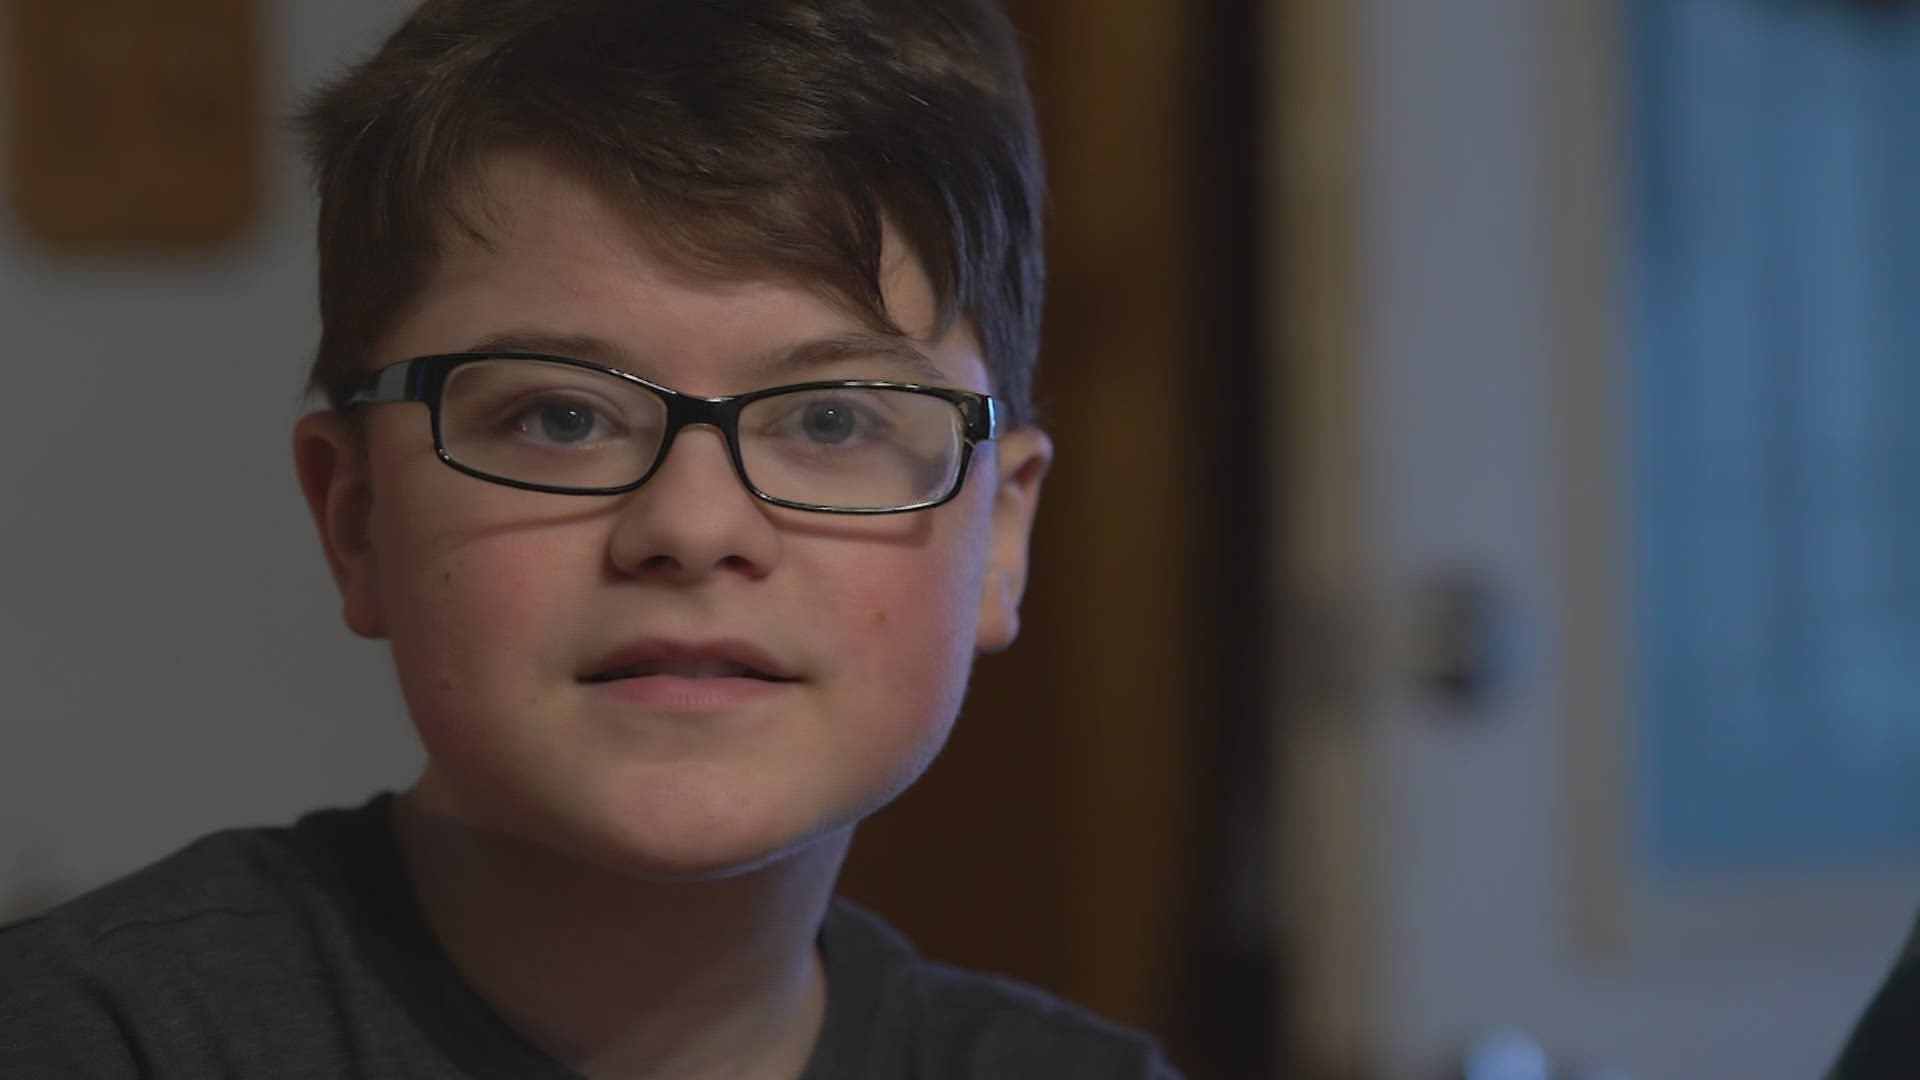 12-year-old Brayden has had a pacemaker for 10 years.